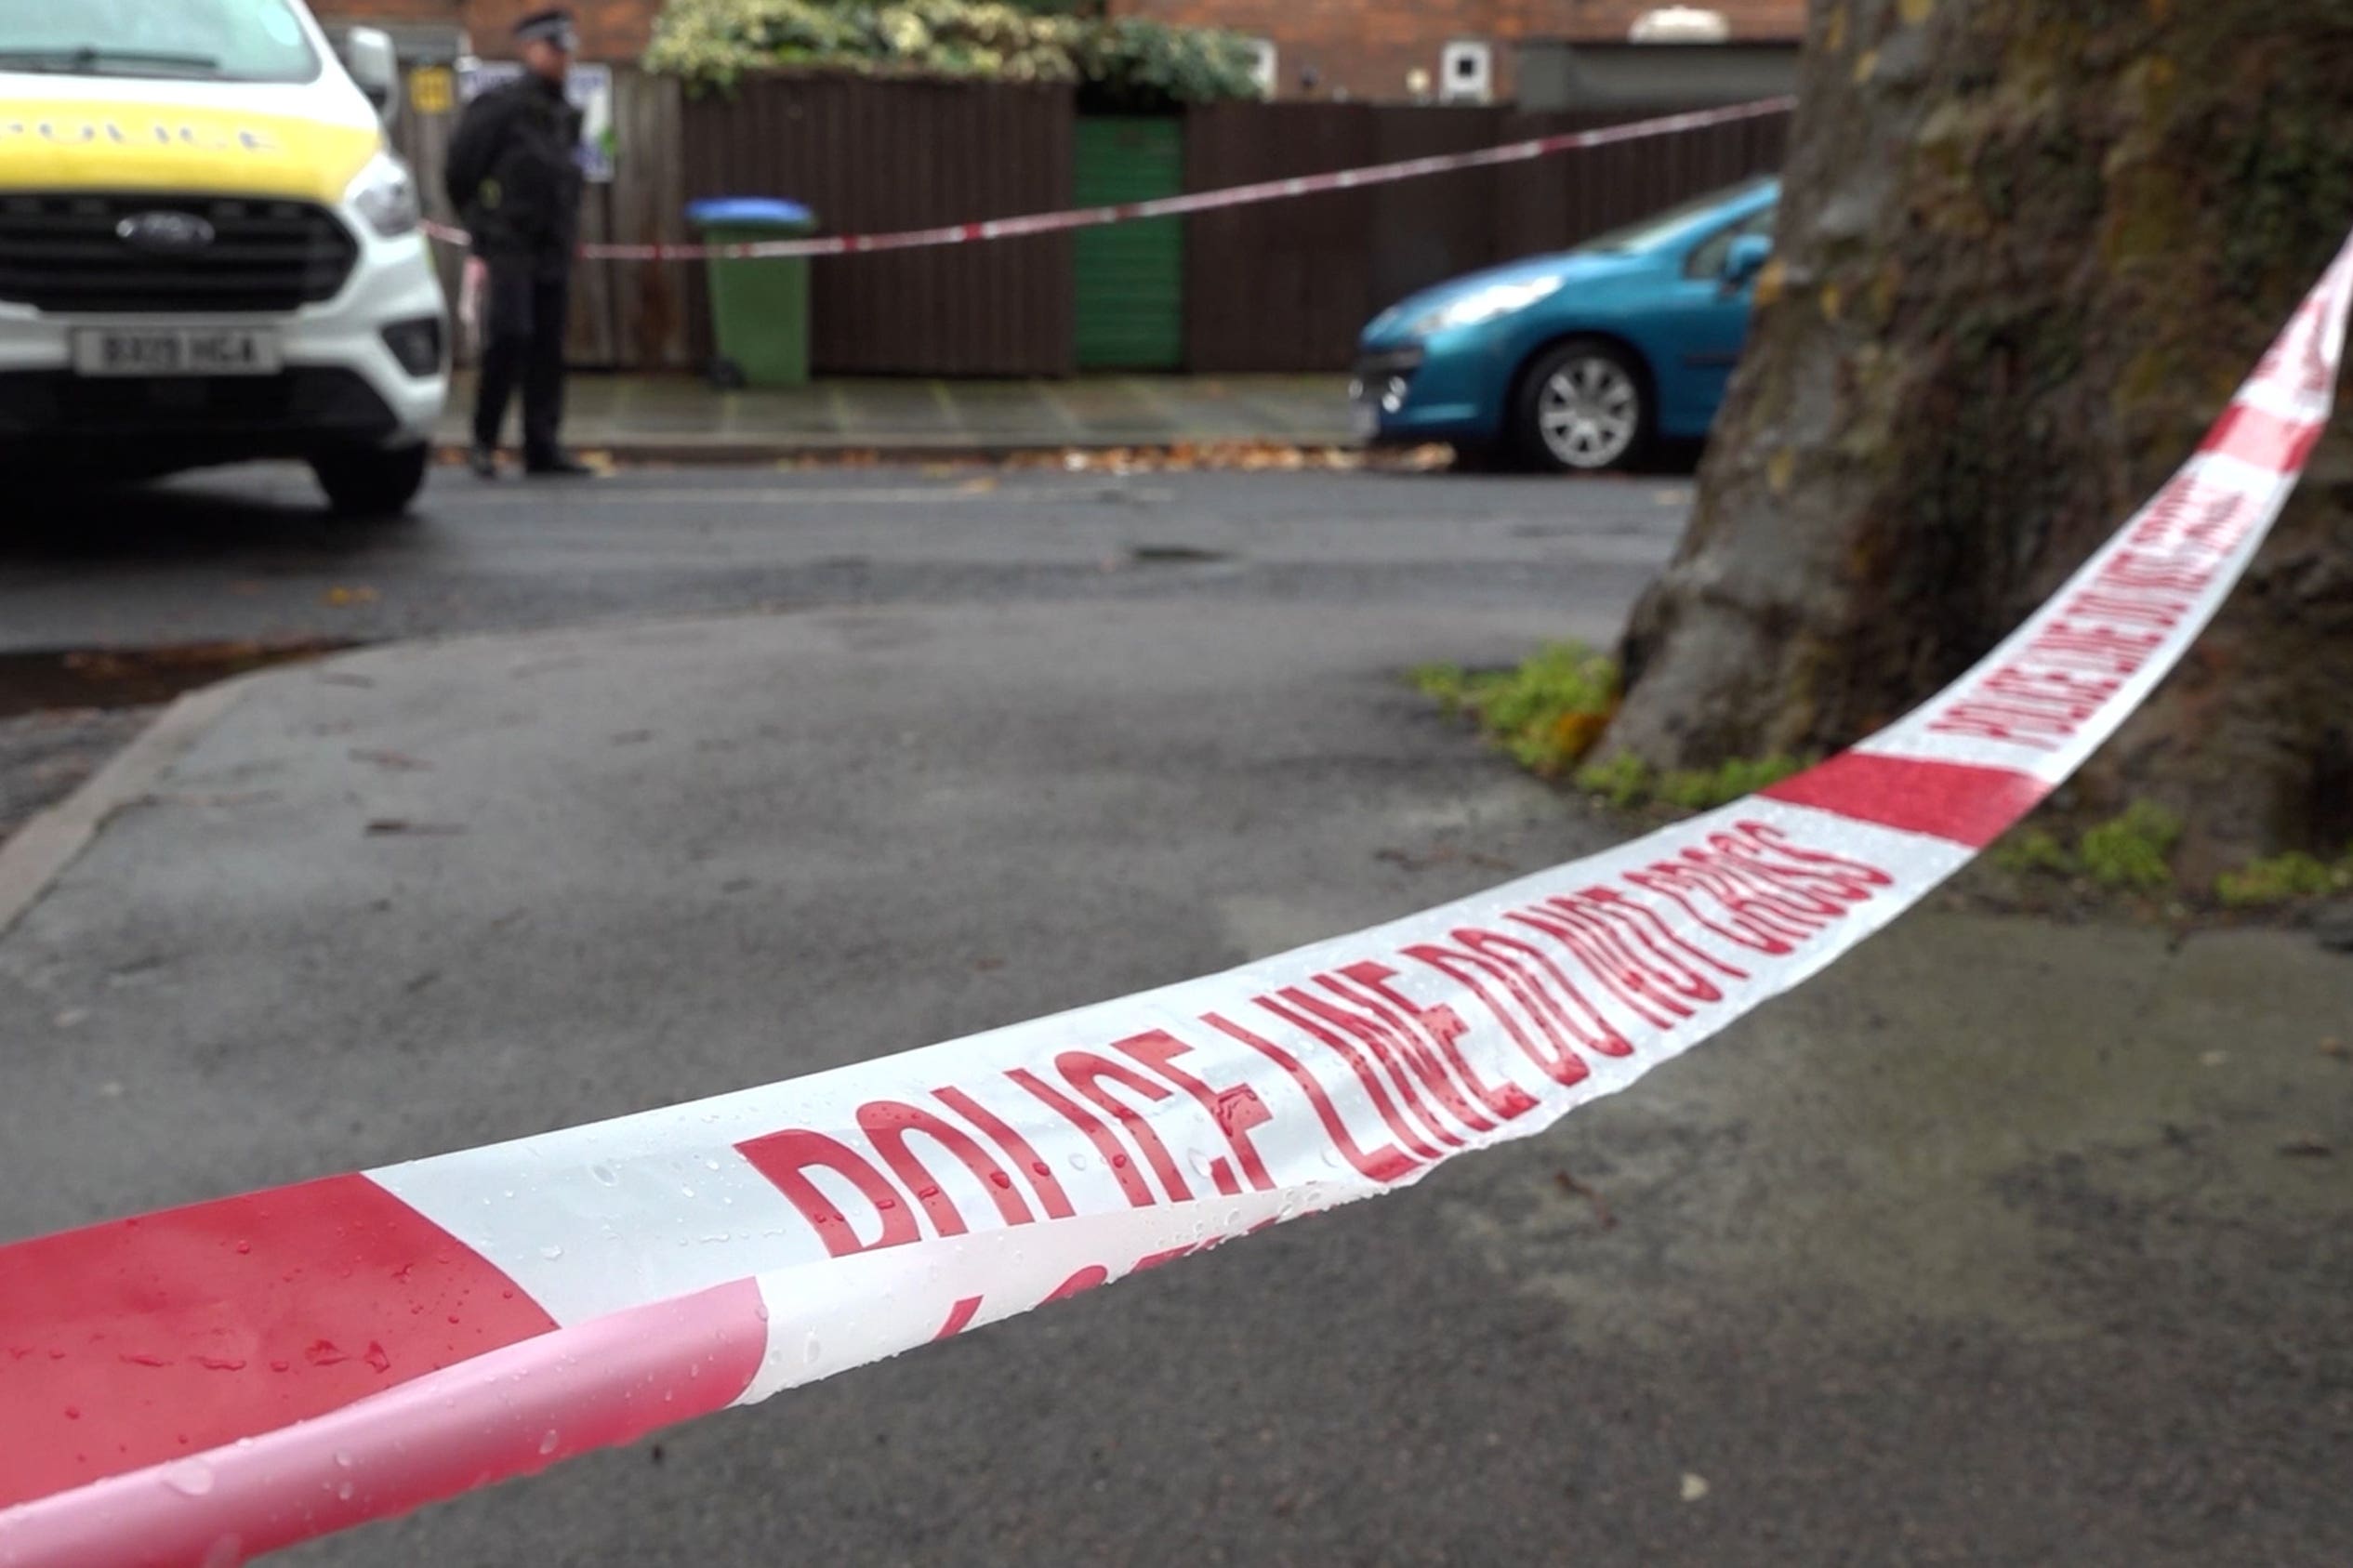 A teenager has been arrested over the fatal stabbings of two 16-year-old boys just a mile apart in south-east London, police said (Grace Donaghy/PA)